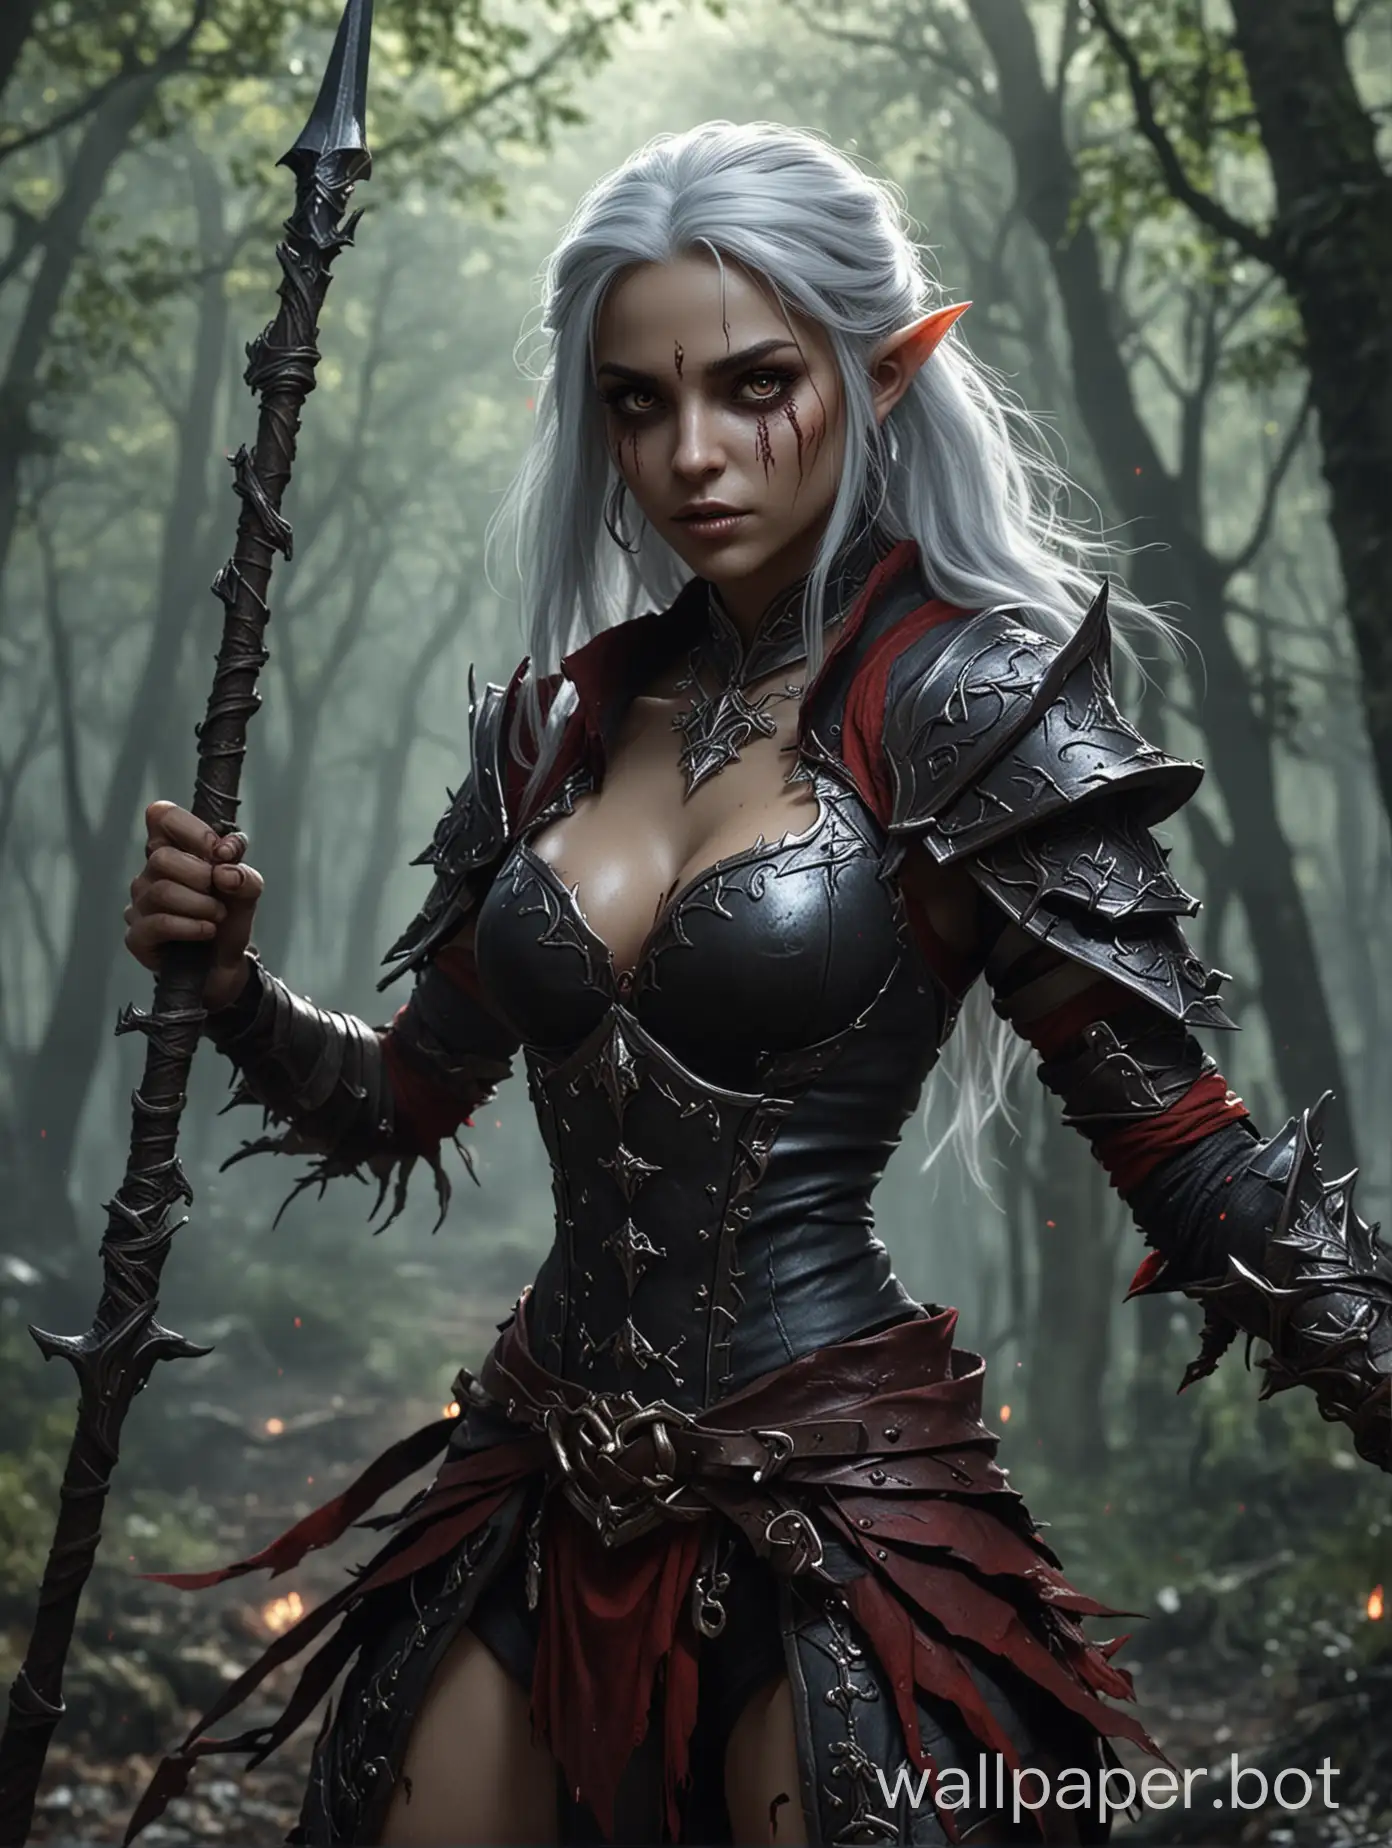 Shadowheart lovely woman, Mintar warrior lovely woman dark elf, sorcerer magical blood, fight in the forest Goblins Sorcerers 4k detail